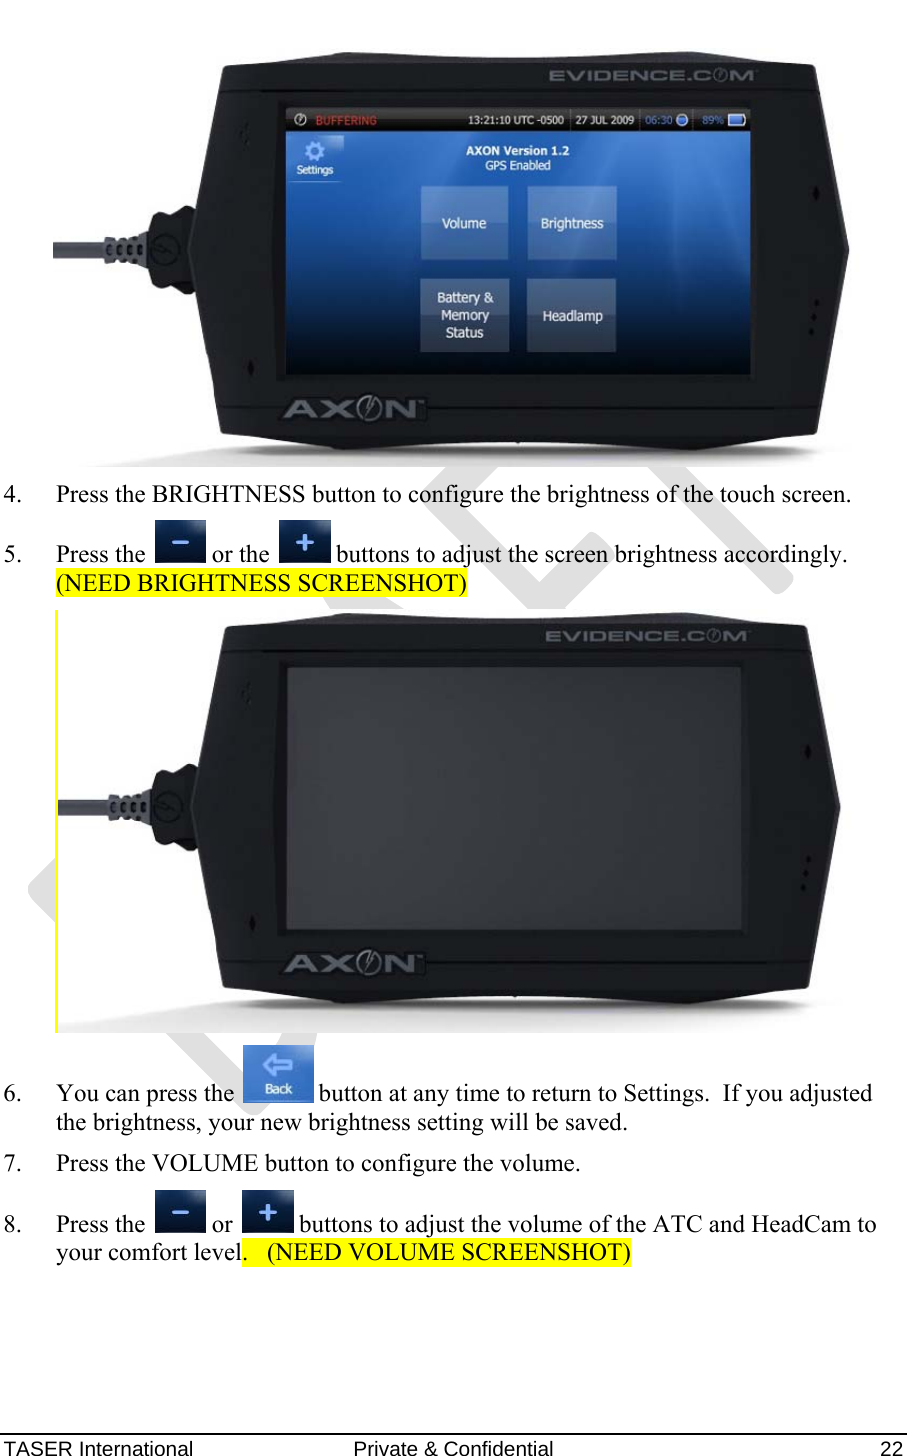 AXON™  4 Jan 2010 TASER International  Private &amp; Confidential    22    4. Press the BRIGHTNESS button to configure the brightness of the touch screen.  5. Press the   or the   buttons to adjust the screen brightness accordingly. (NEED BRIGHTNESS SCREENSHOT)  6. You can press the   button at any time to return to Settings.  If you adjusted the brightness, your new brightness setting will be saved. 7. Press the VOLUME button to configure the volume. 8. Press the   or   buttons to adjust the volume of the ATC and HeadCam to your comfort level.   (NEED VOLUME SCREENSHOT) 